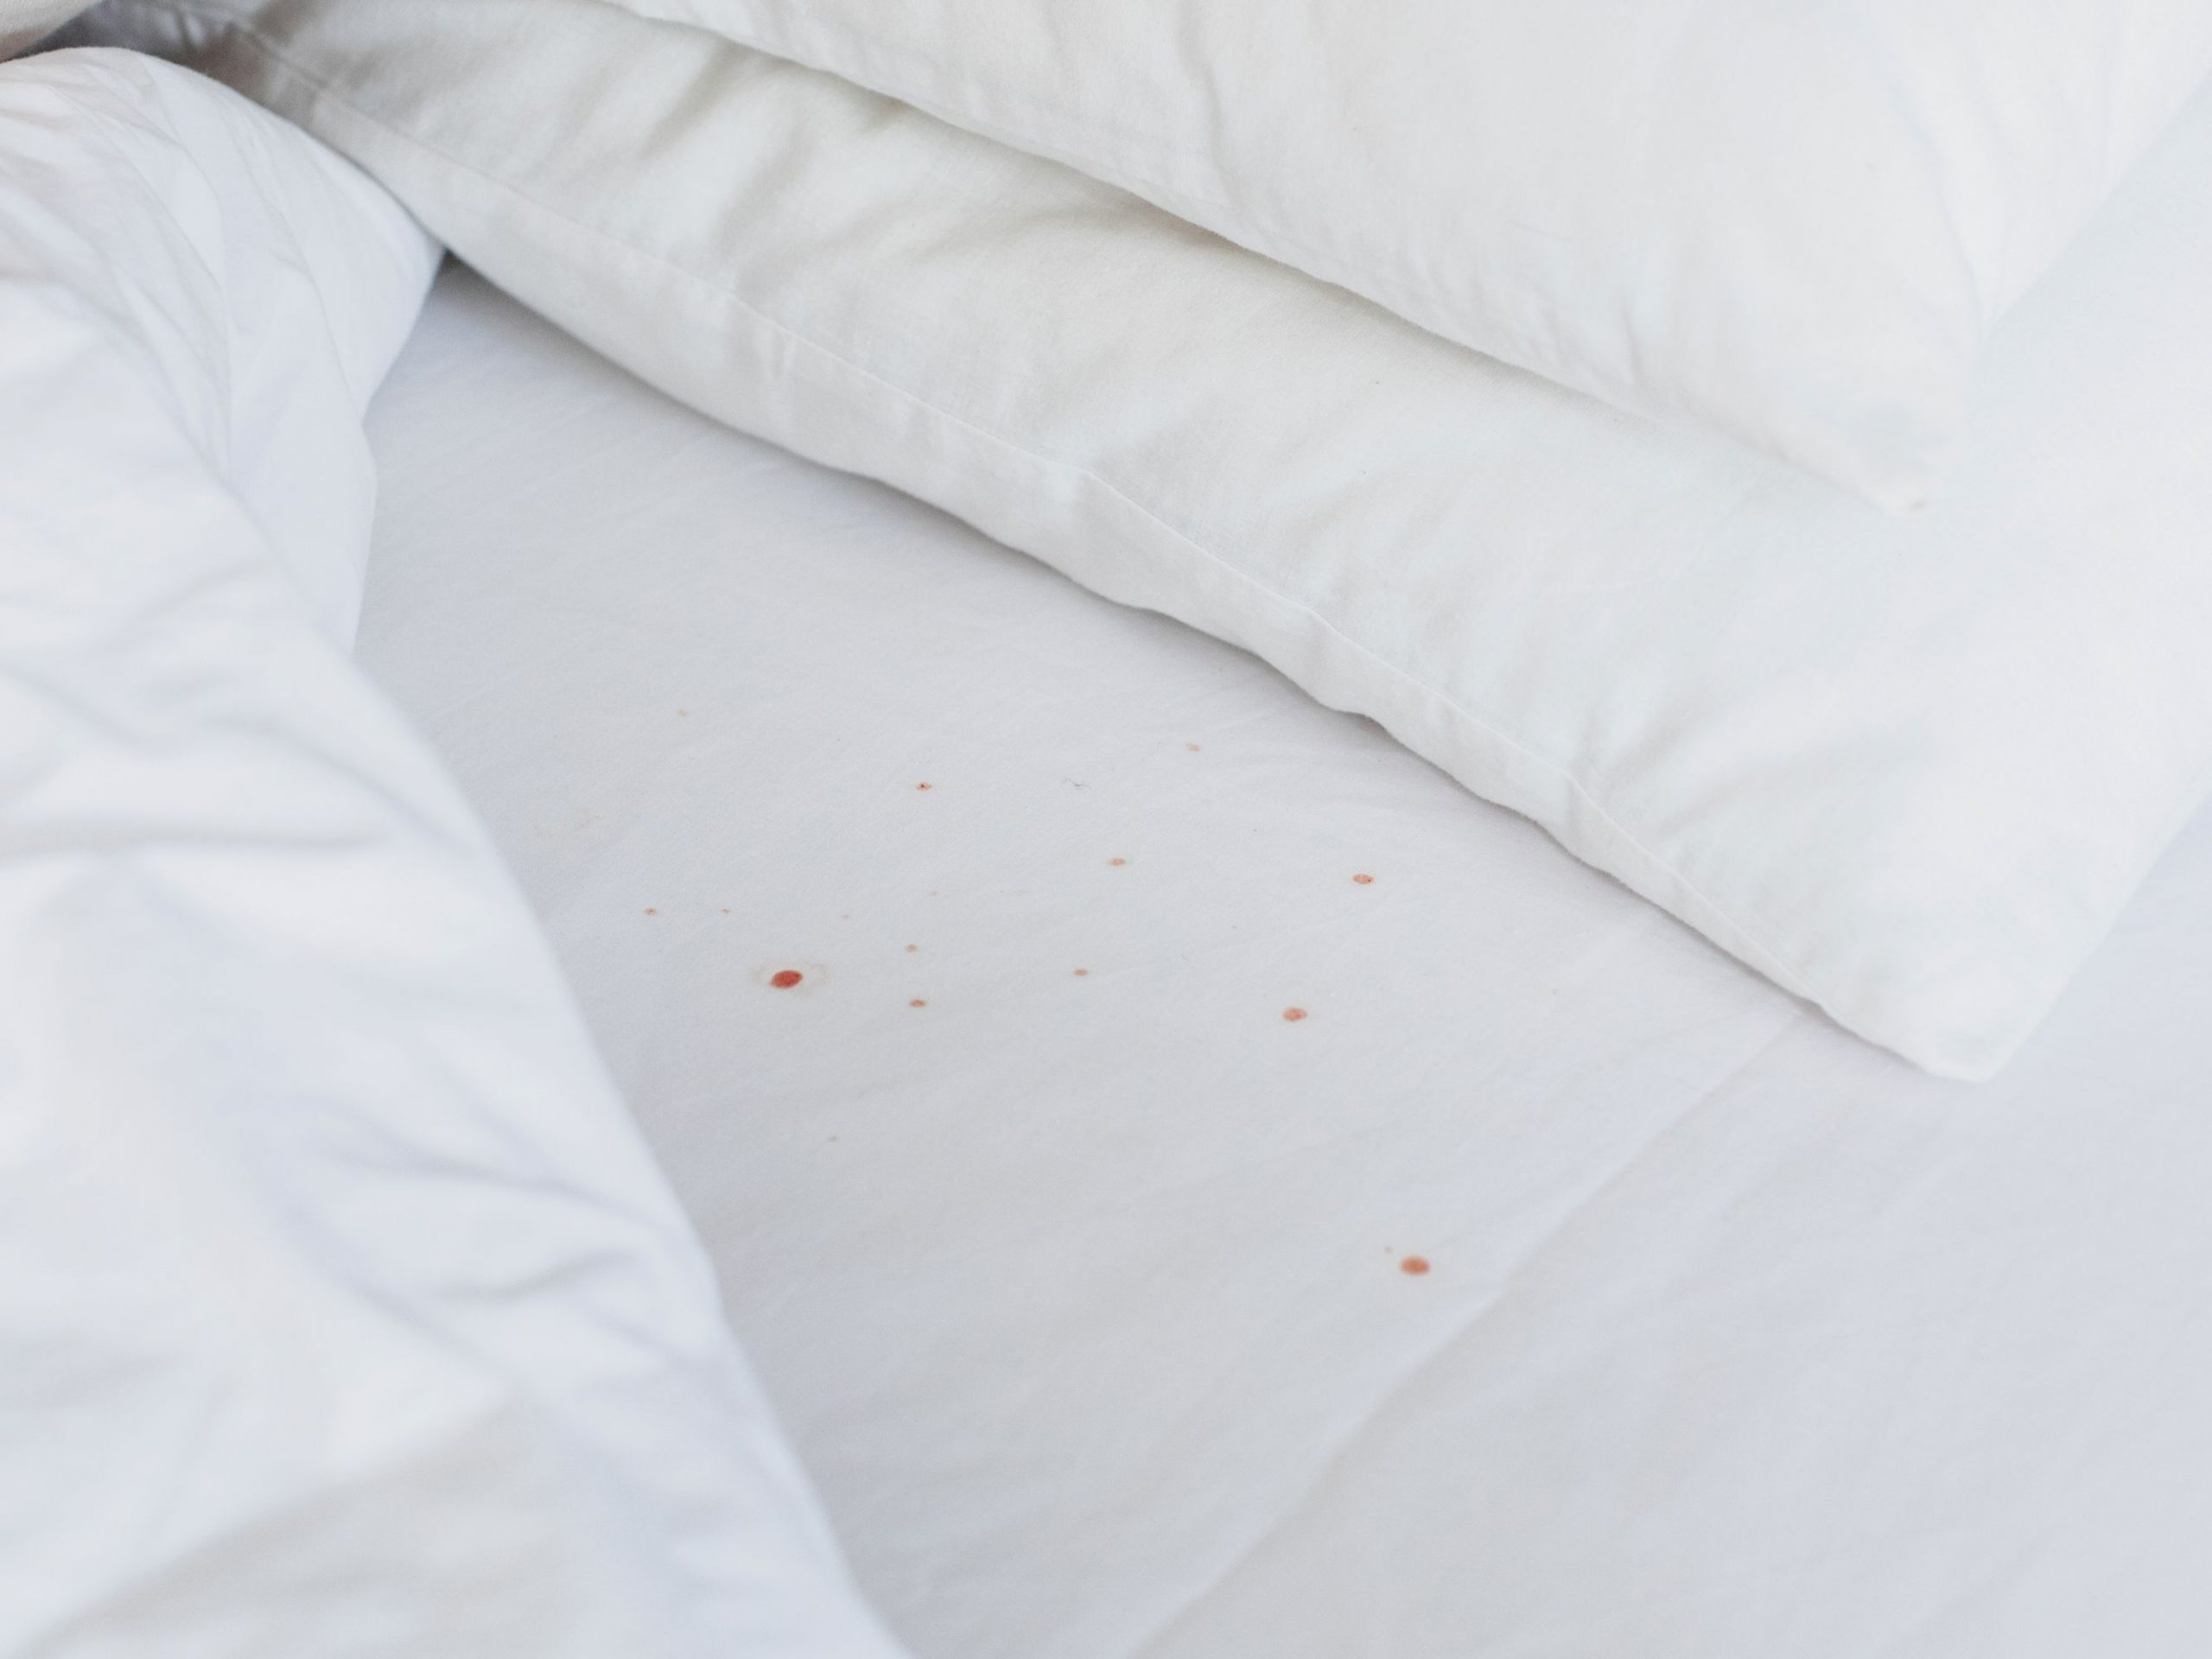 mattress stains from bed bugs